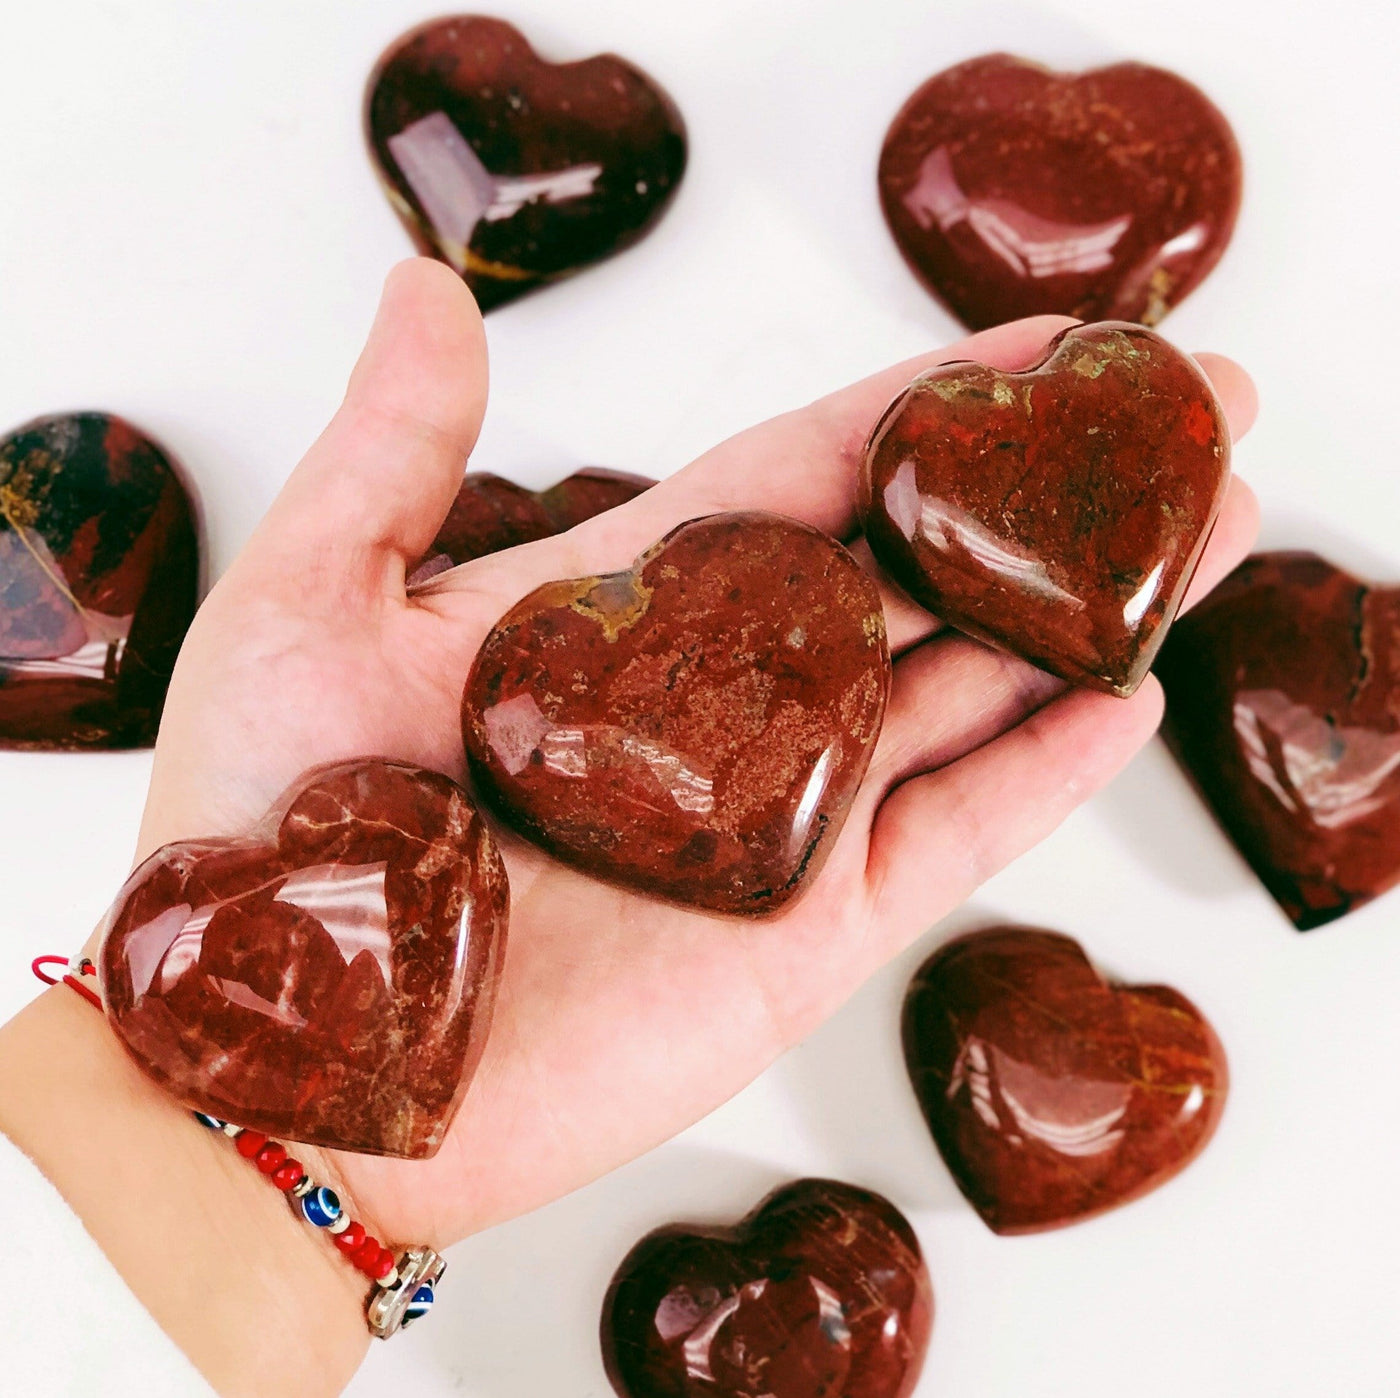 Hand holding up 3 Red Jasper Heart Shaped Stones with others blurred in white background